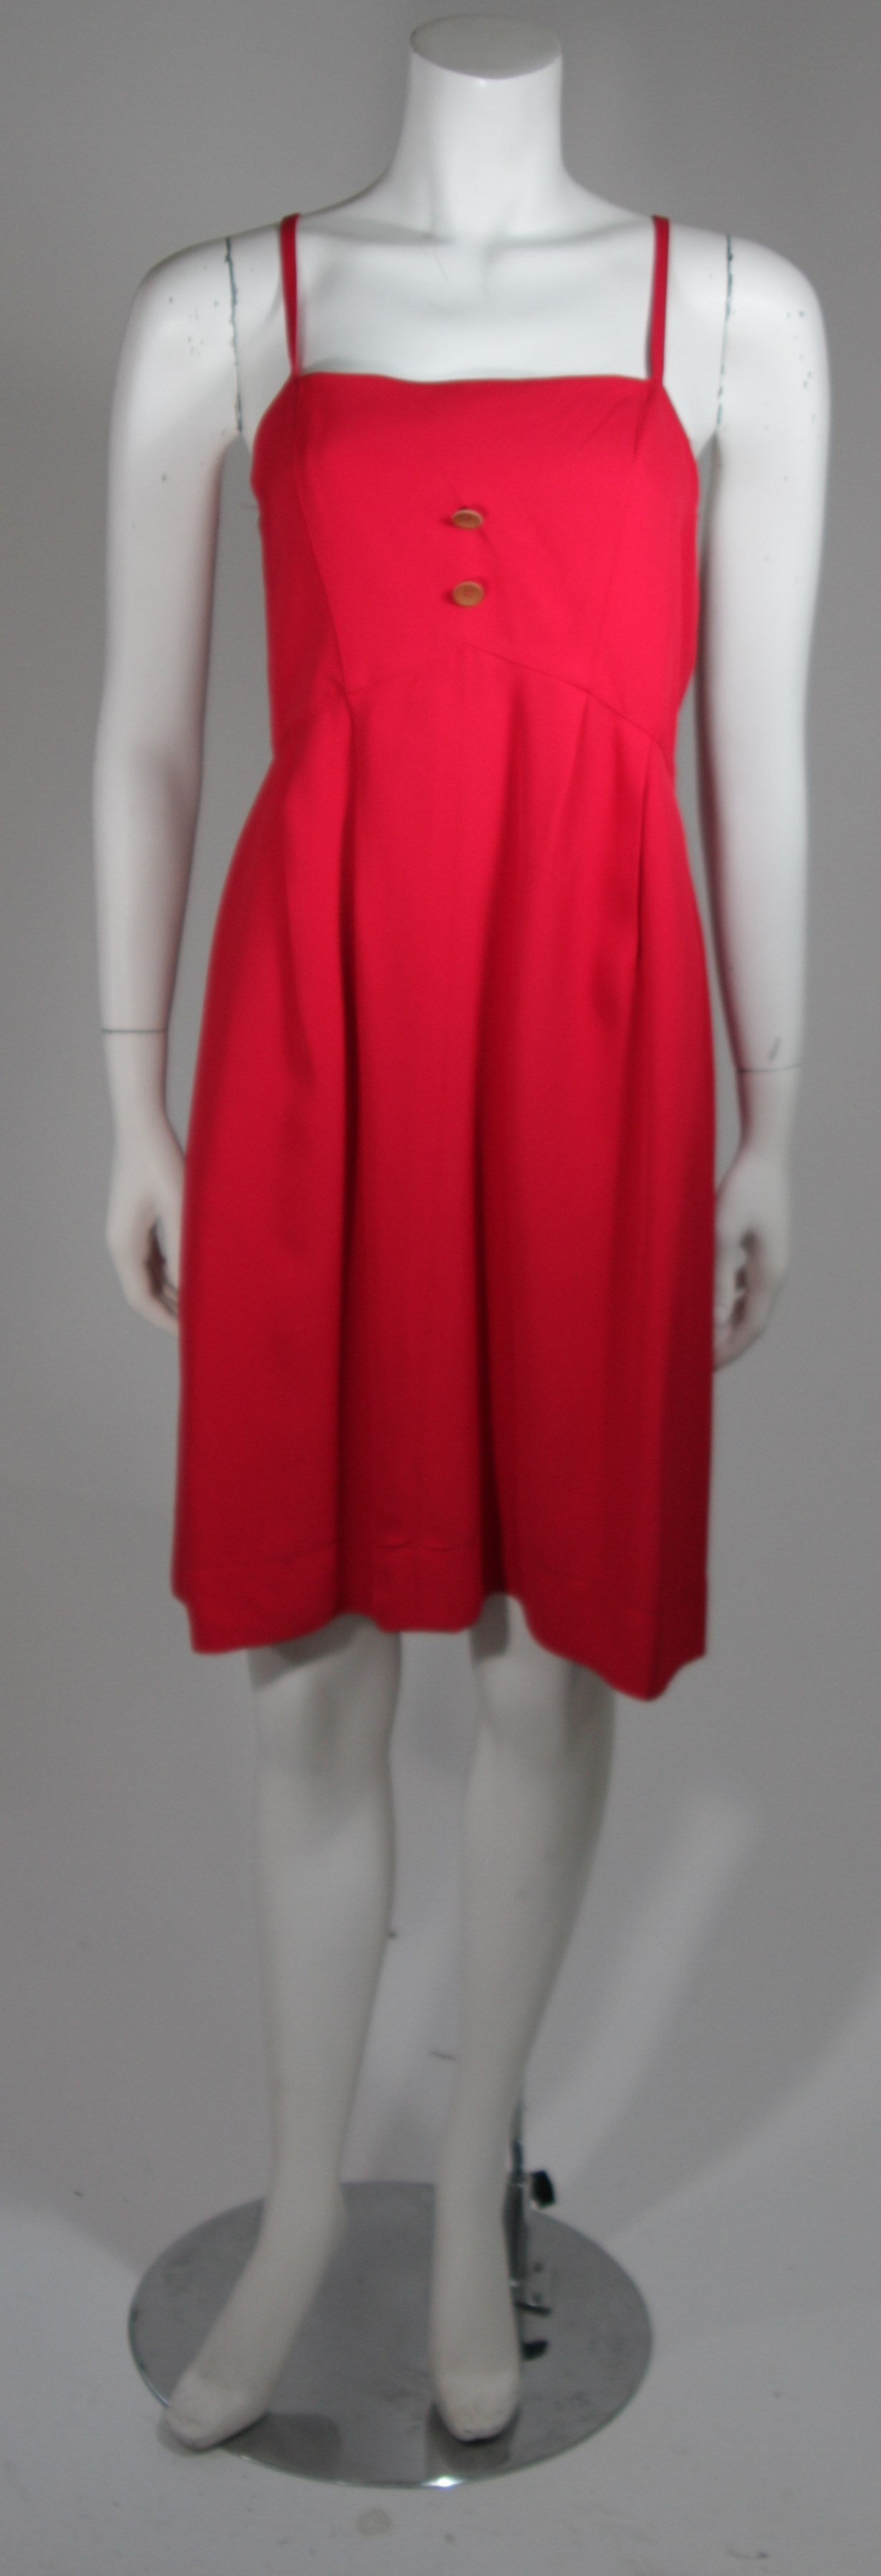 Fendi Red Cocktail Dress with Caplet Attachment and Button Details Size 2 For Sale 2